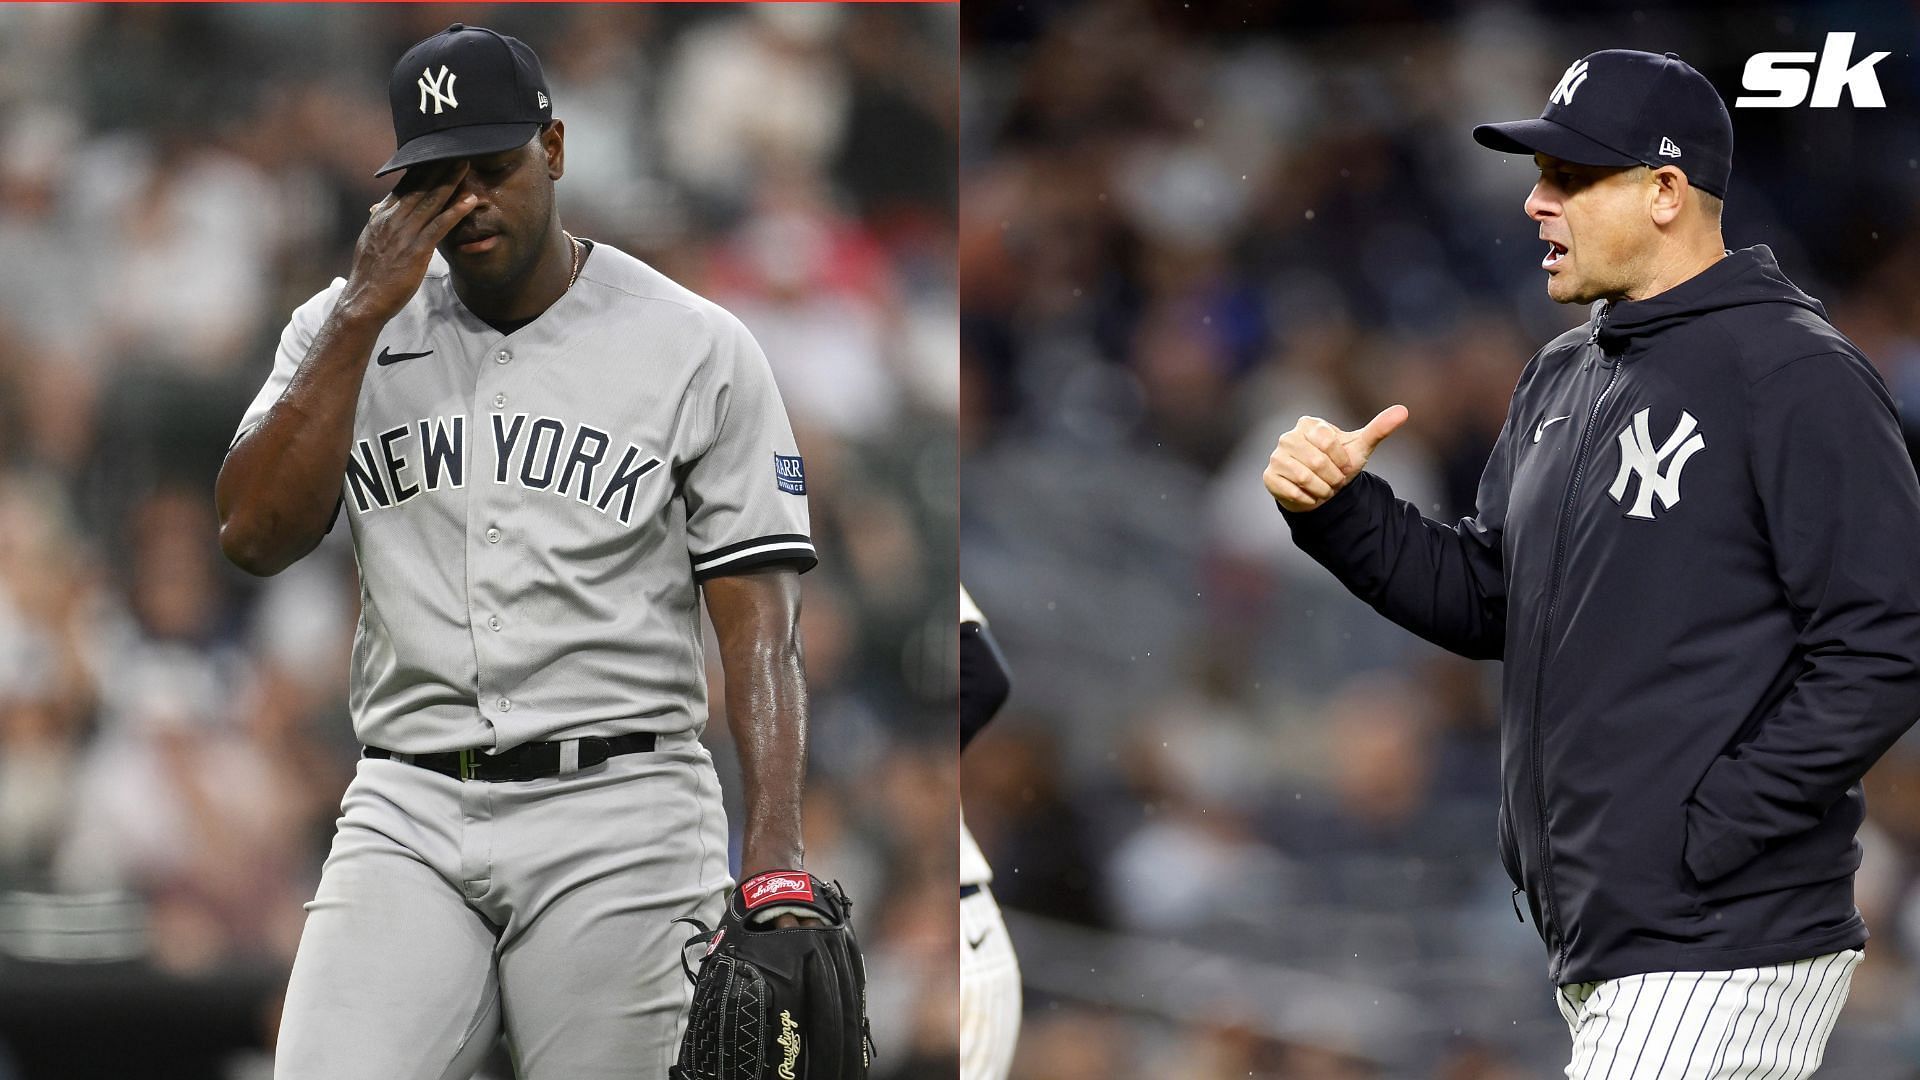 The New York Yankees have some soul-searching to do